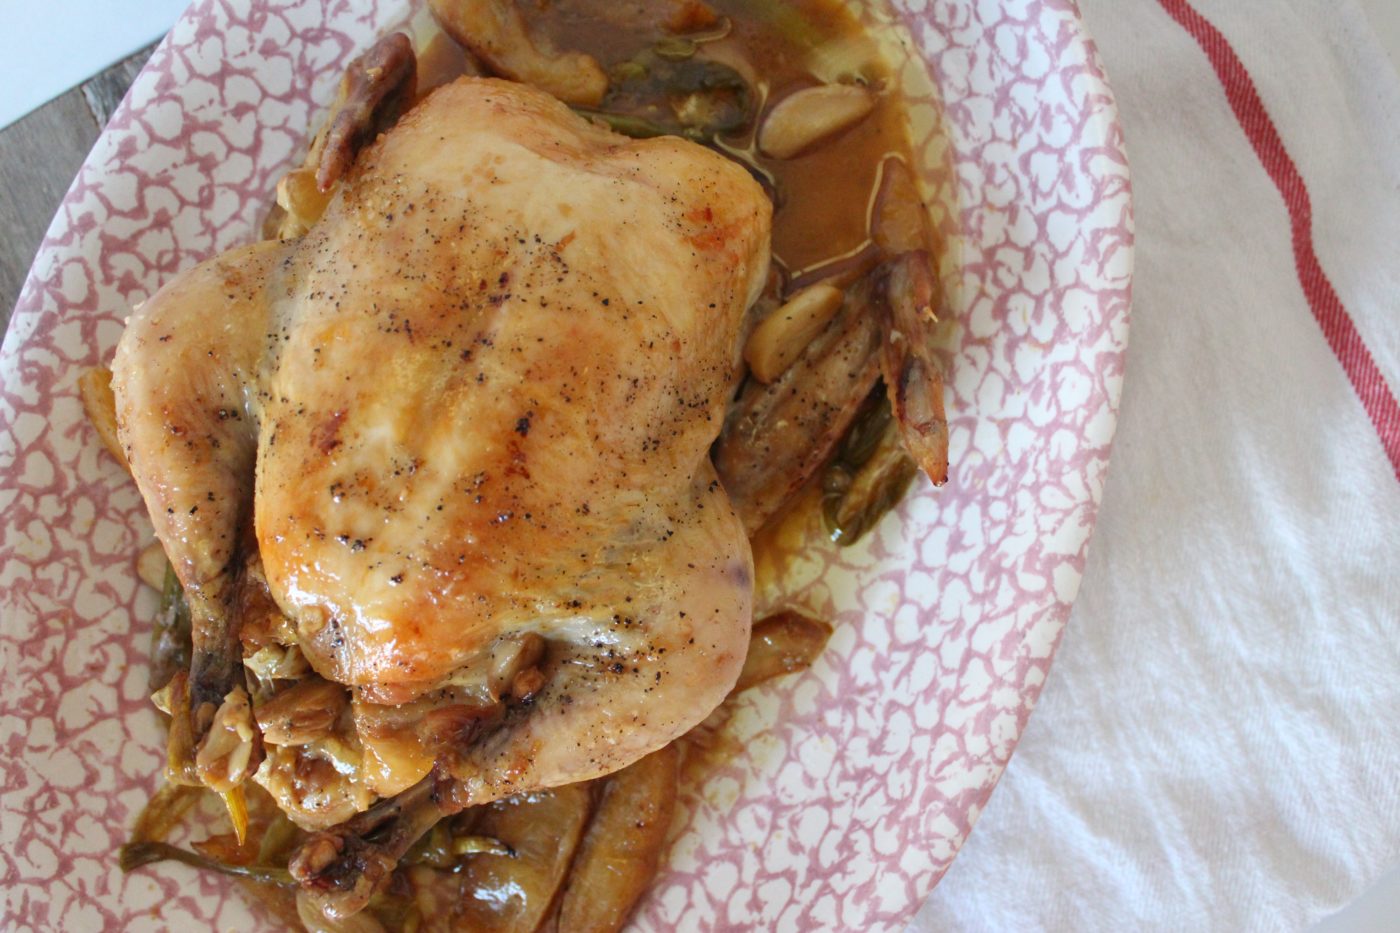 Slow roasted chicken is one of the easiest, hands-off ways to prepare a meal.